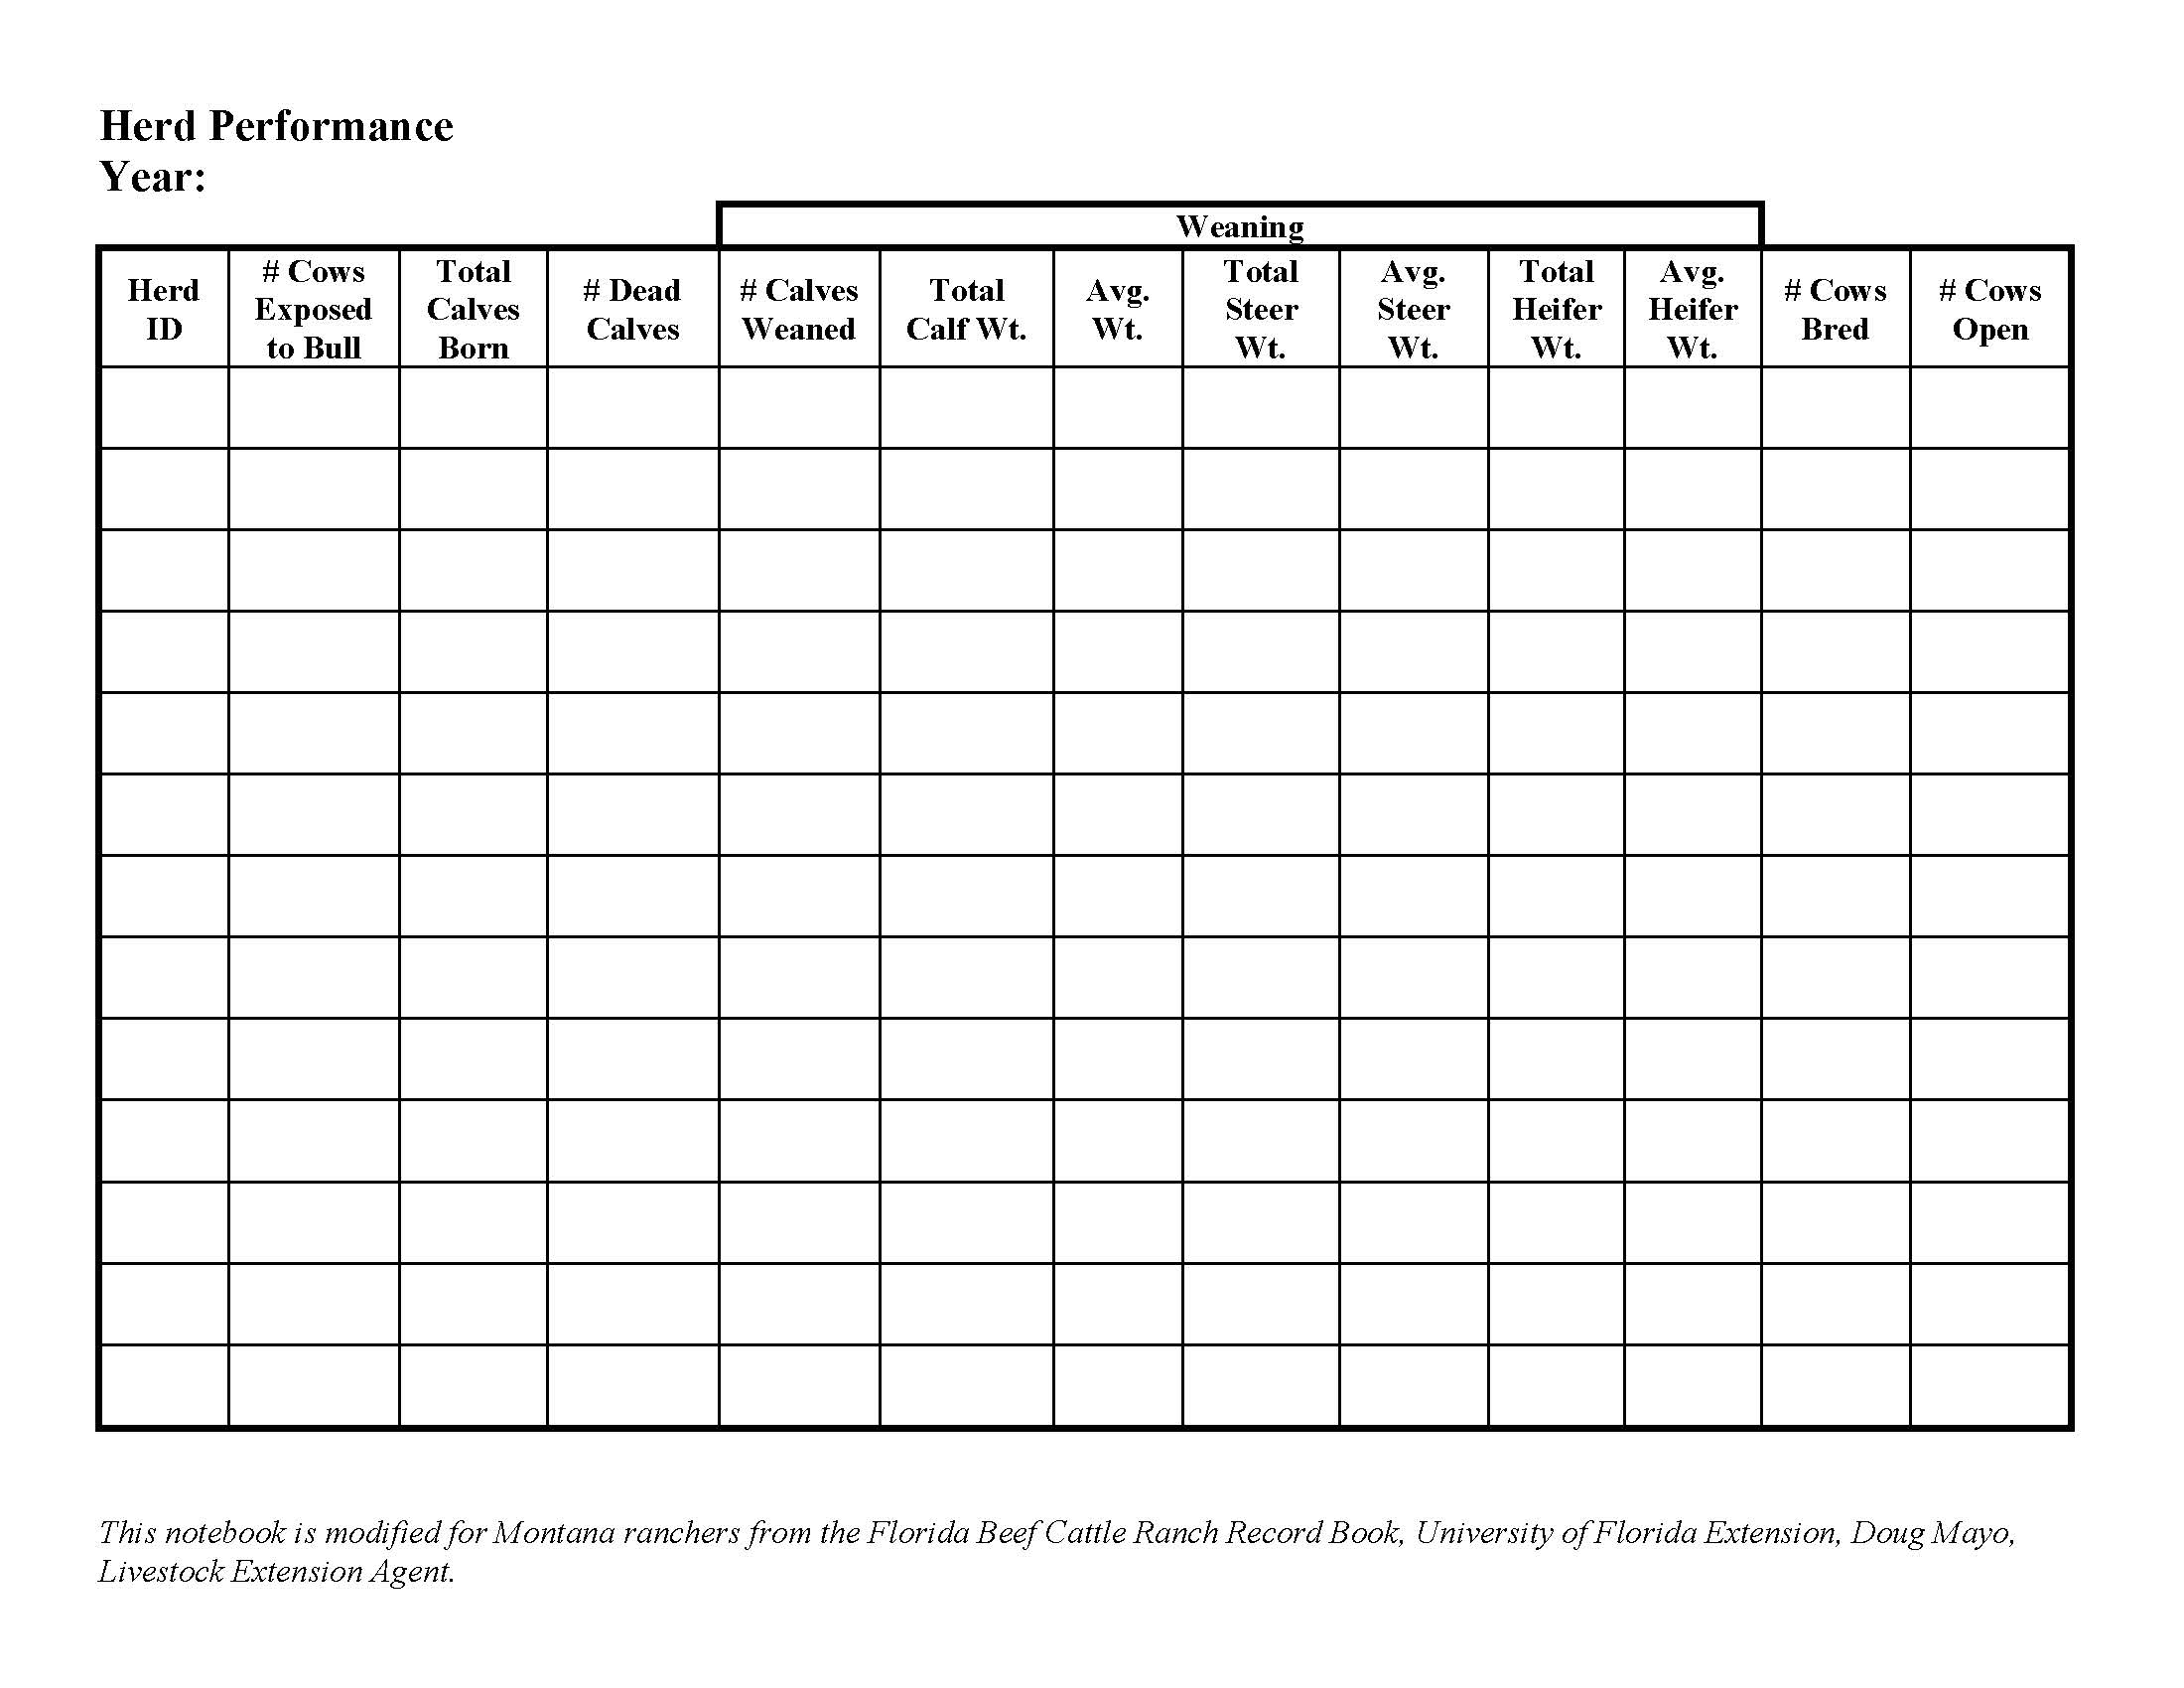 A sample table for keeping records on herd performance. Used in the rancher notebook.